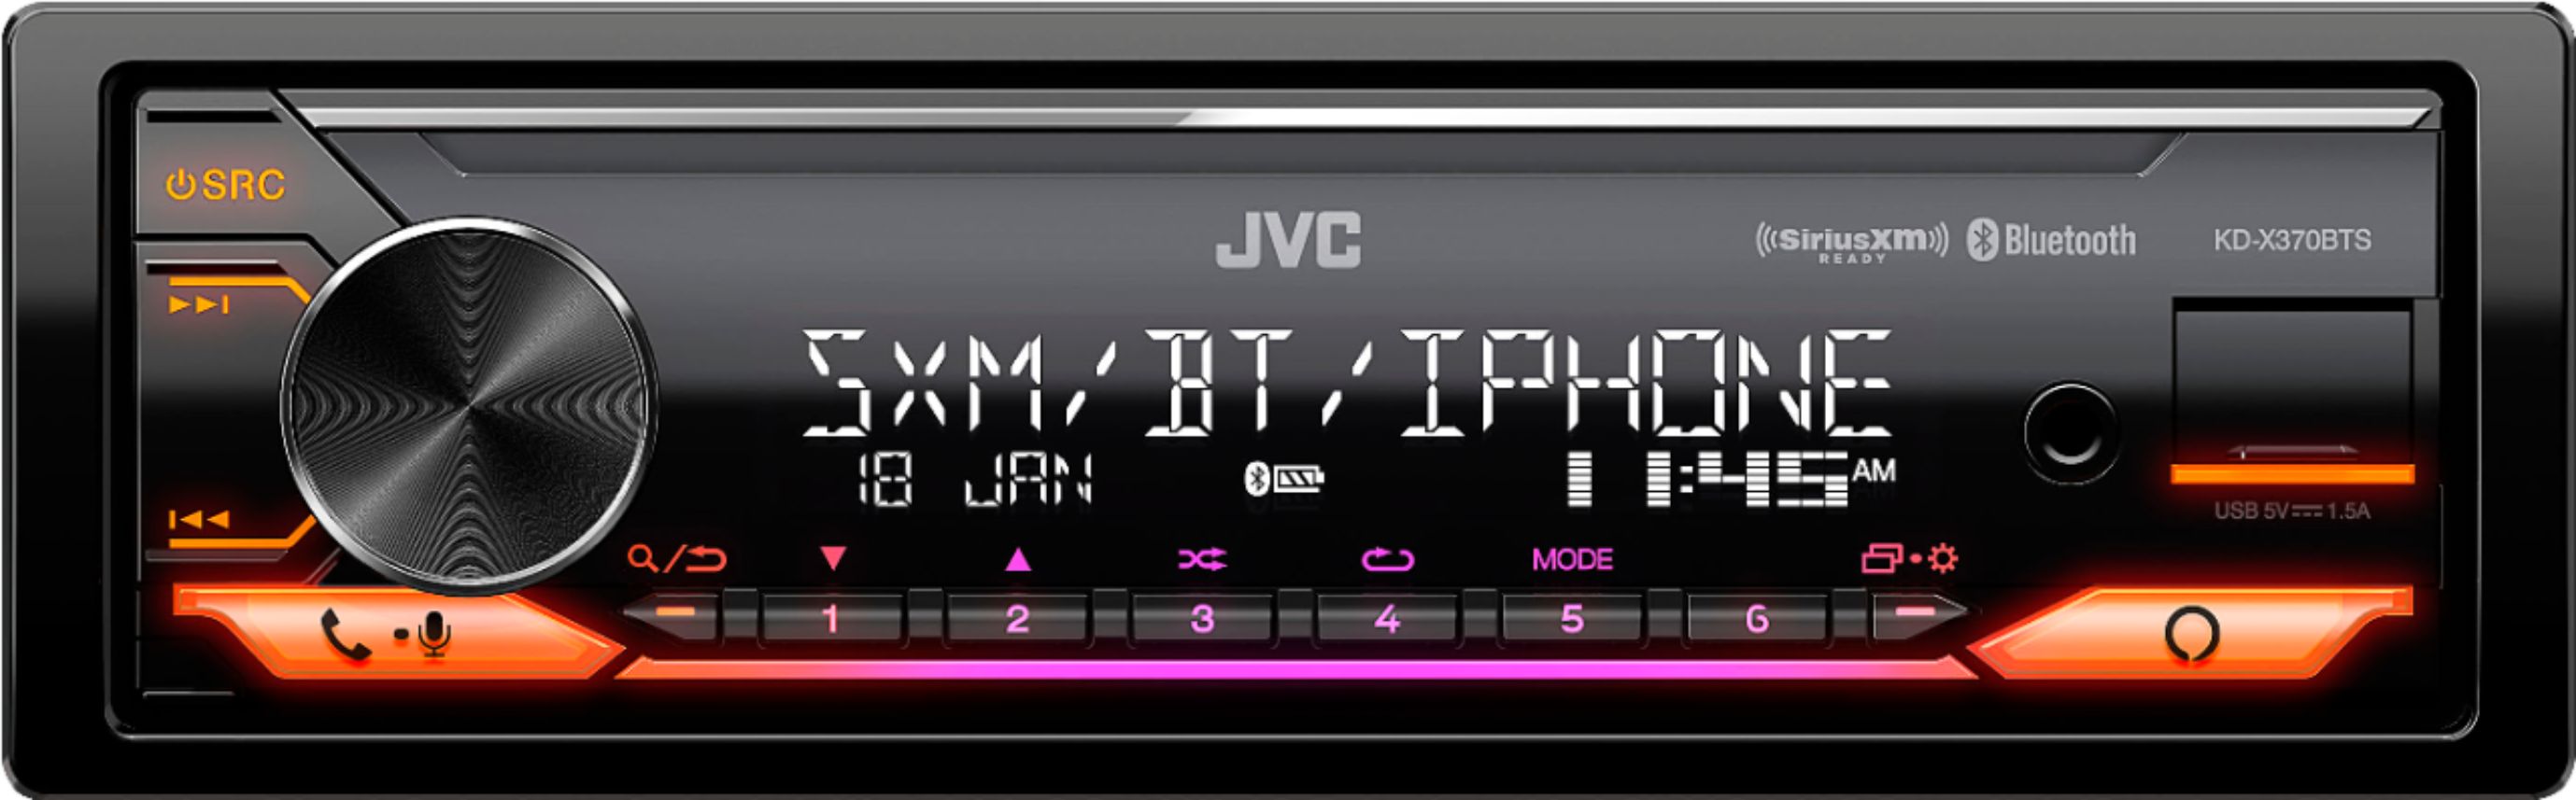 JVC Bluetooth CD/DM Receiver with Voice Assistant Built in and Satellite  Radio Ready Black KW-R950BTS - Best Buy